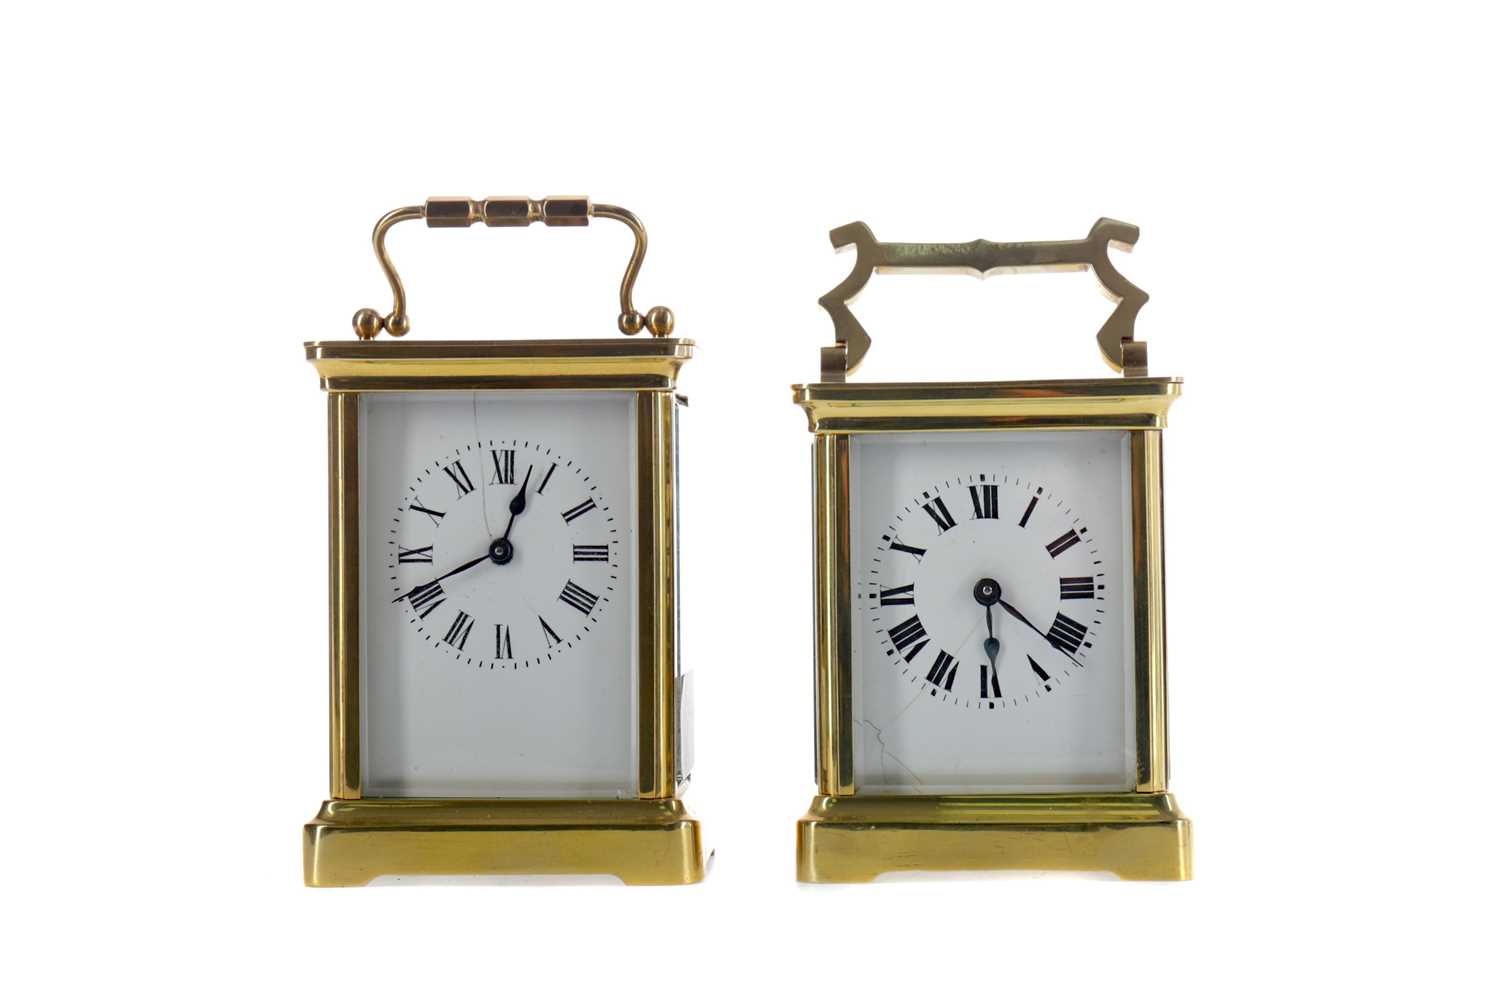 Lot 1854 - AN EARLY 20TH CENTURY CARRIAGE CLOCK, ALONG WITH ANOTHER